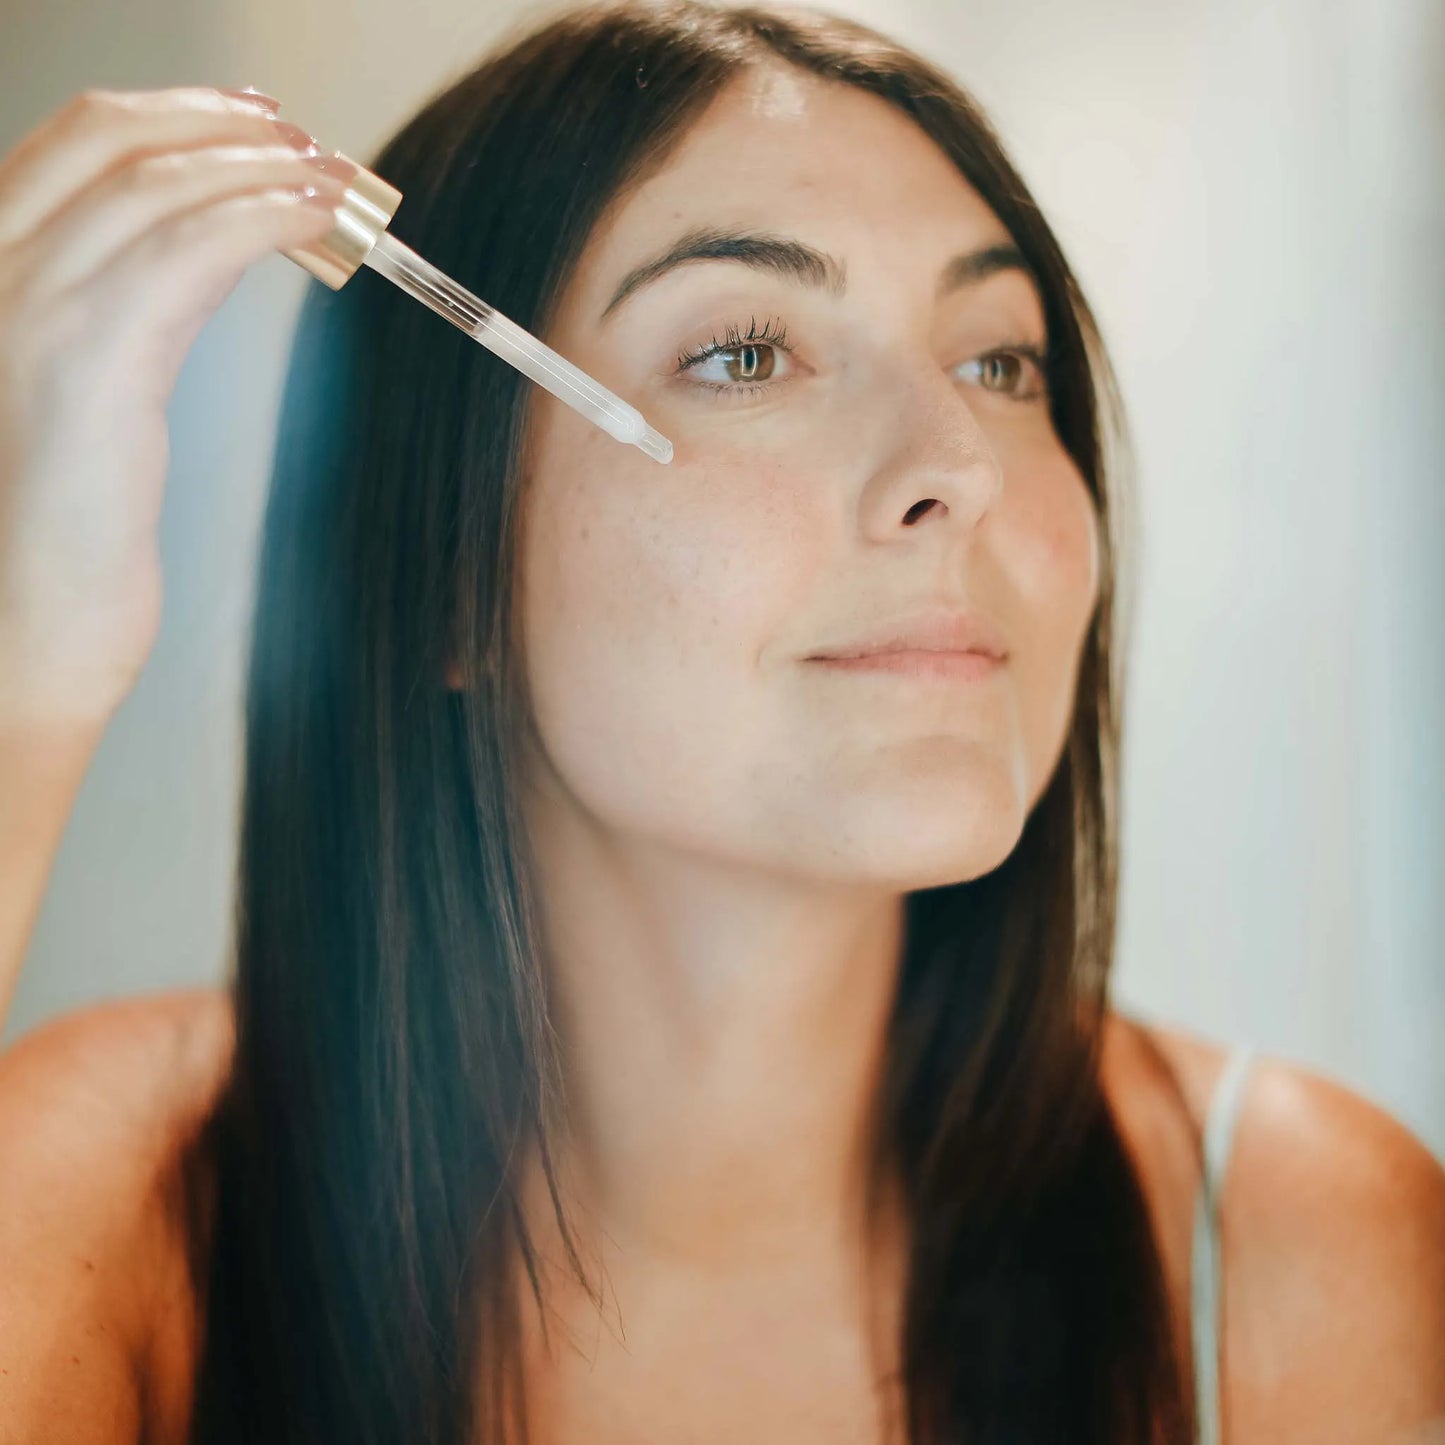 a woman applies the product on her face